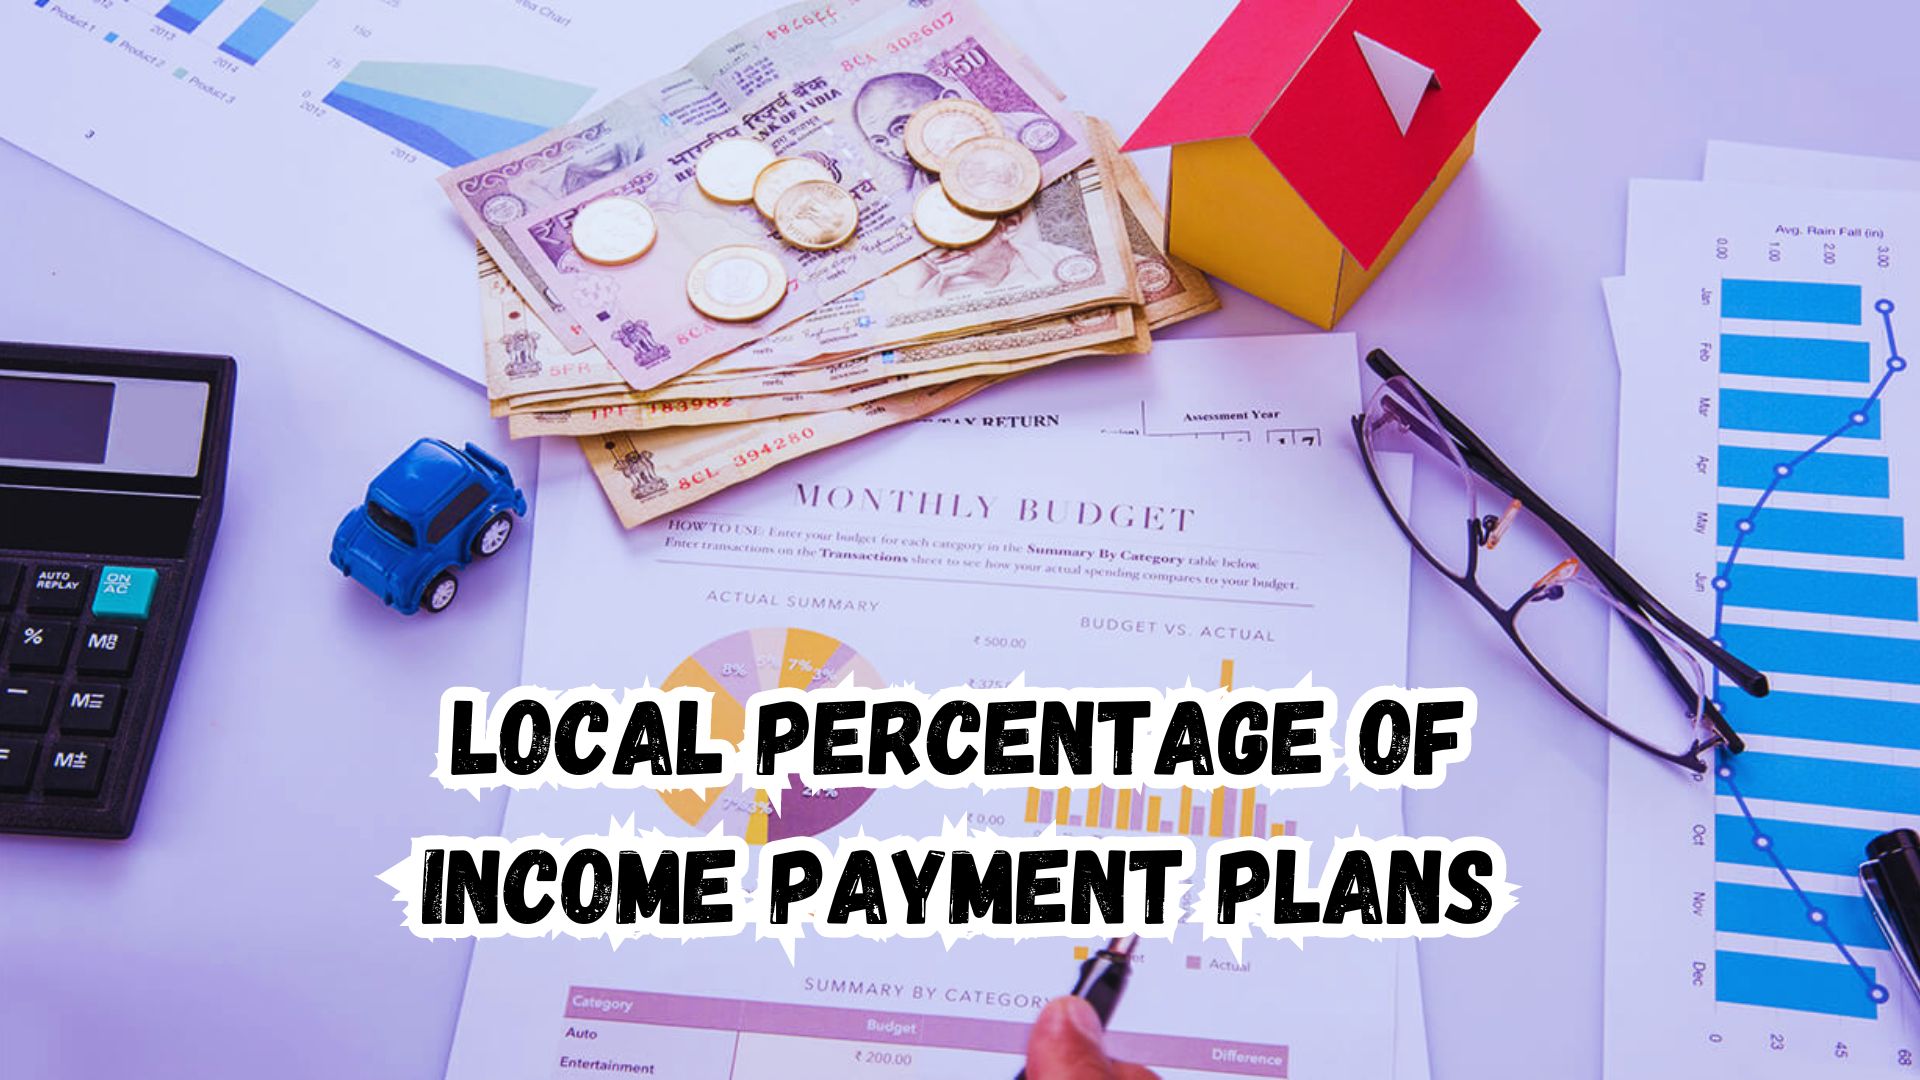 Local Percentage of Income Payment Plans.